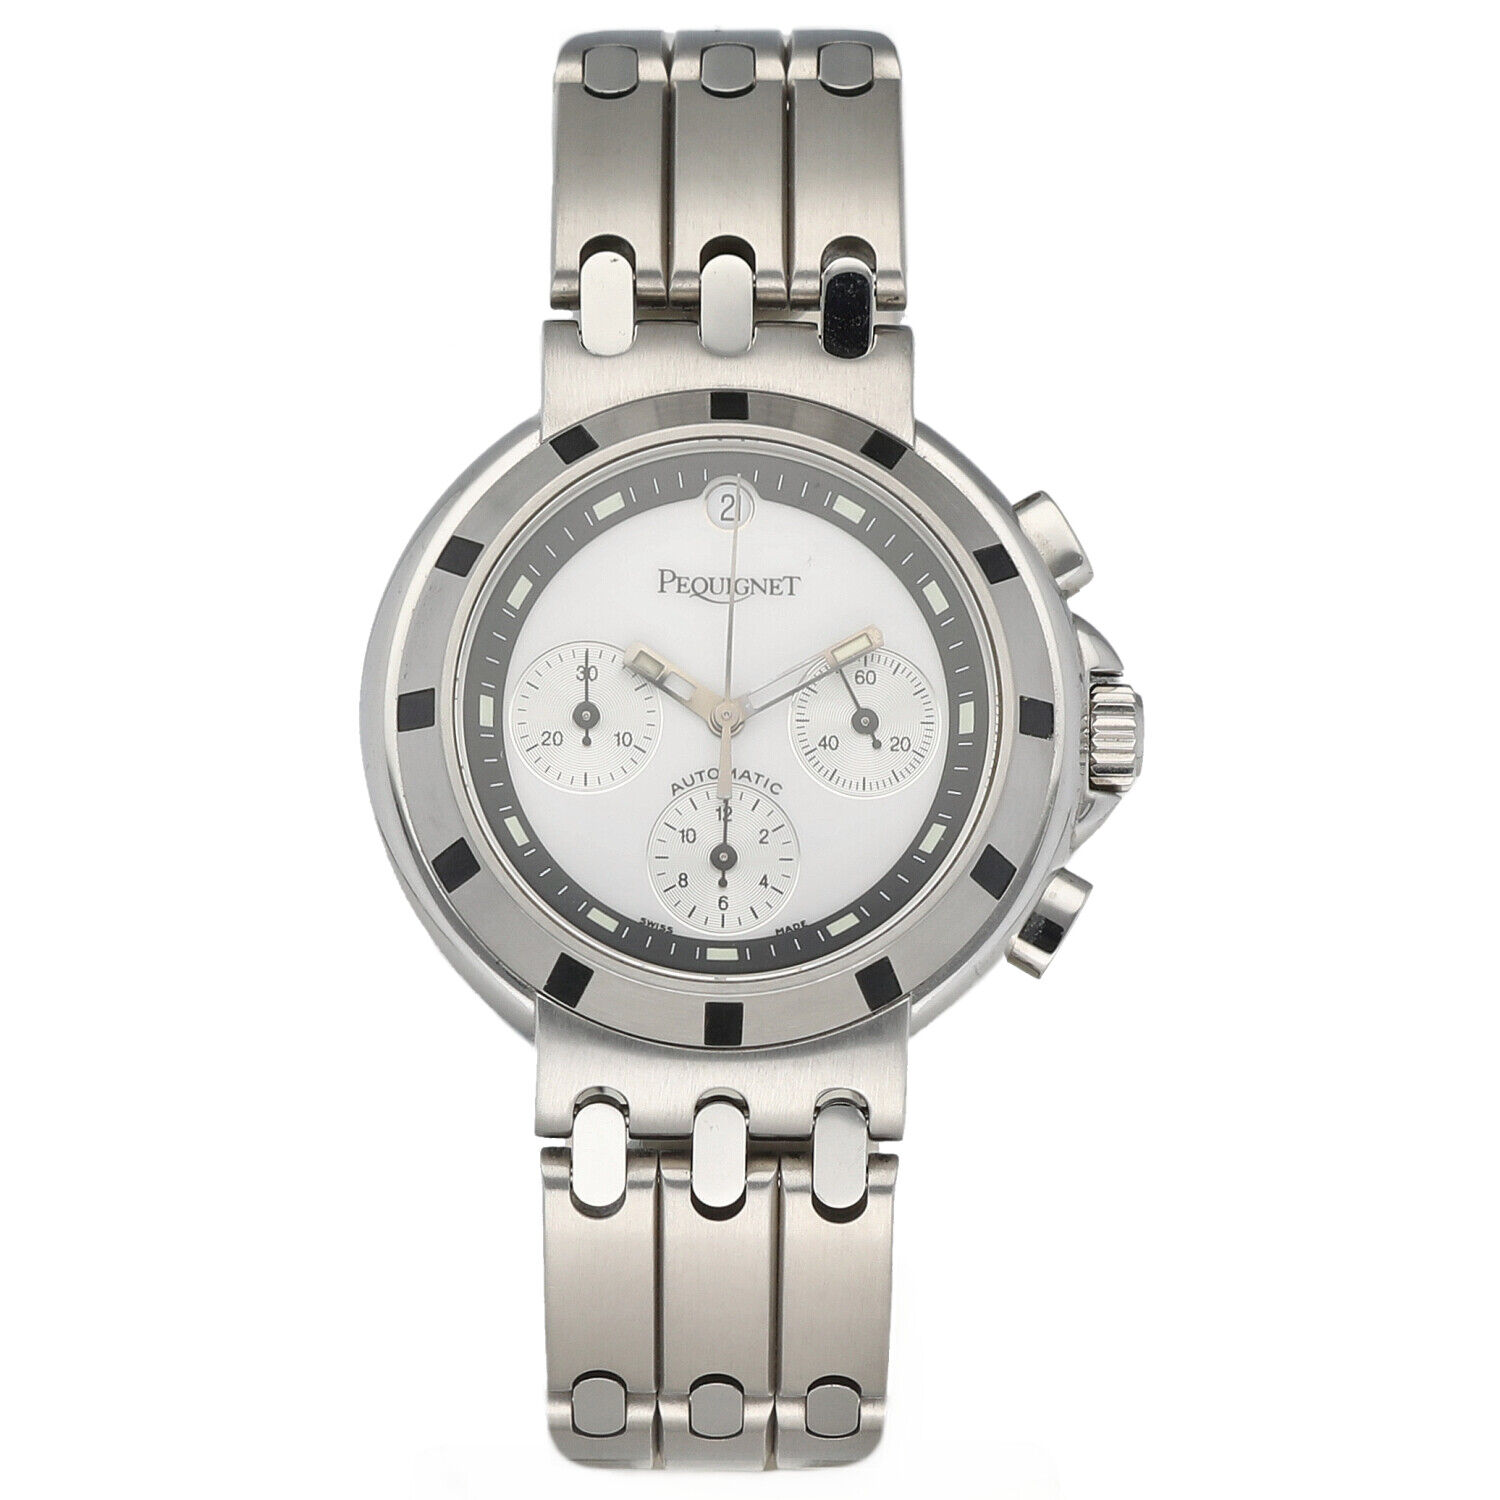 Pequignet-028-Chrono-Stainless-Steel-40mm-White-Dial-Swiss-Automatic-Mens-Watch-125133496002